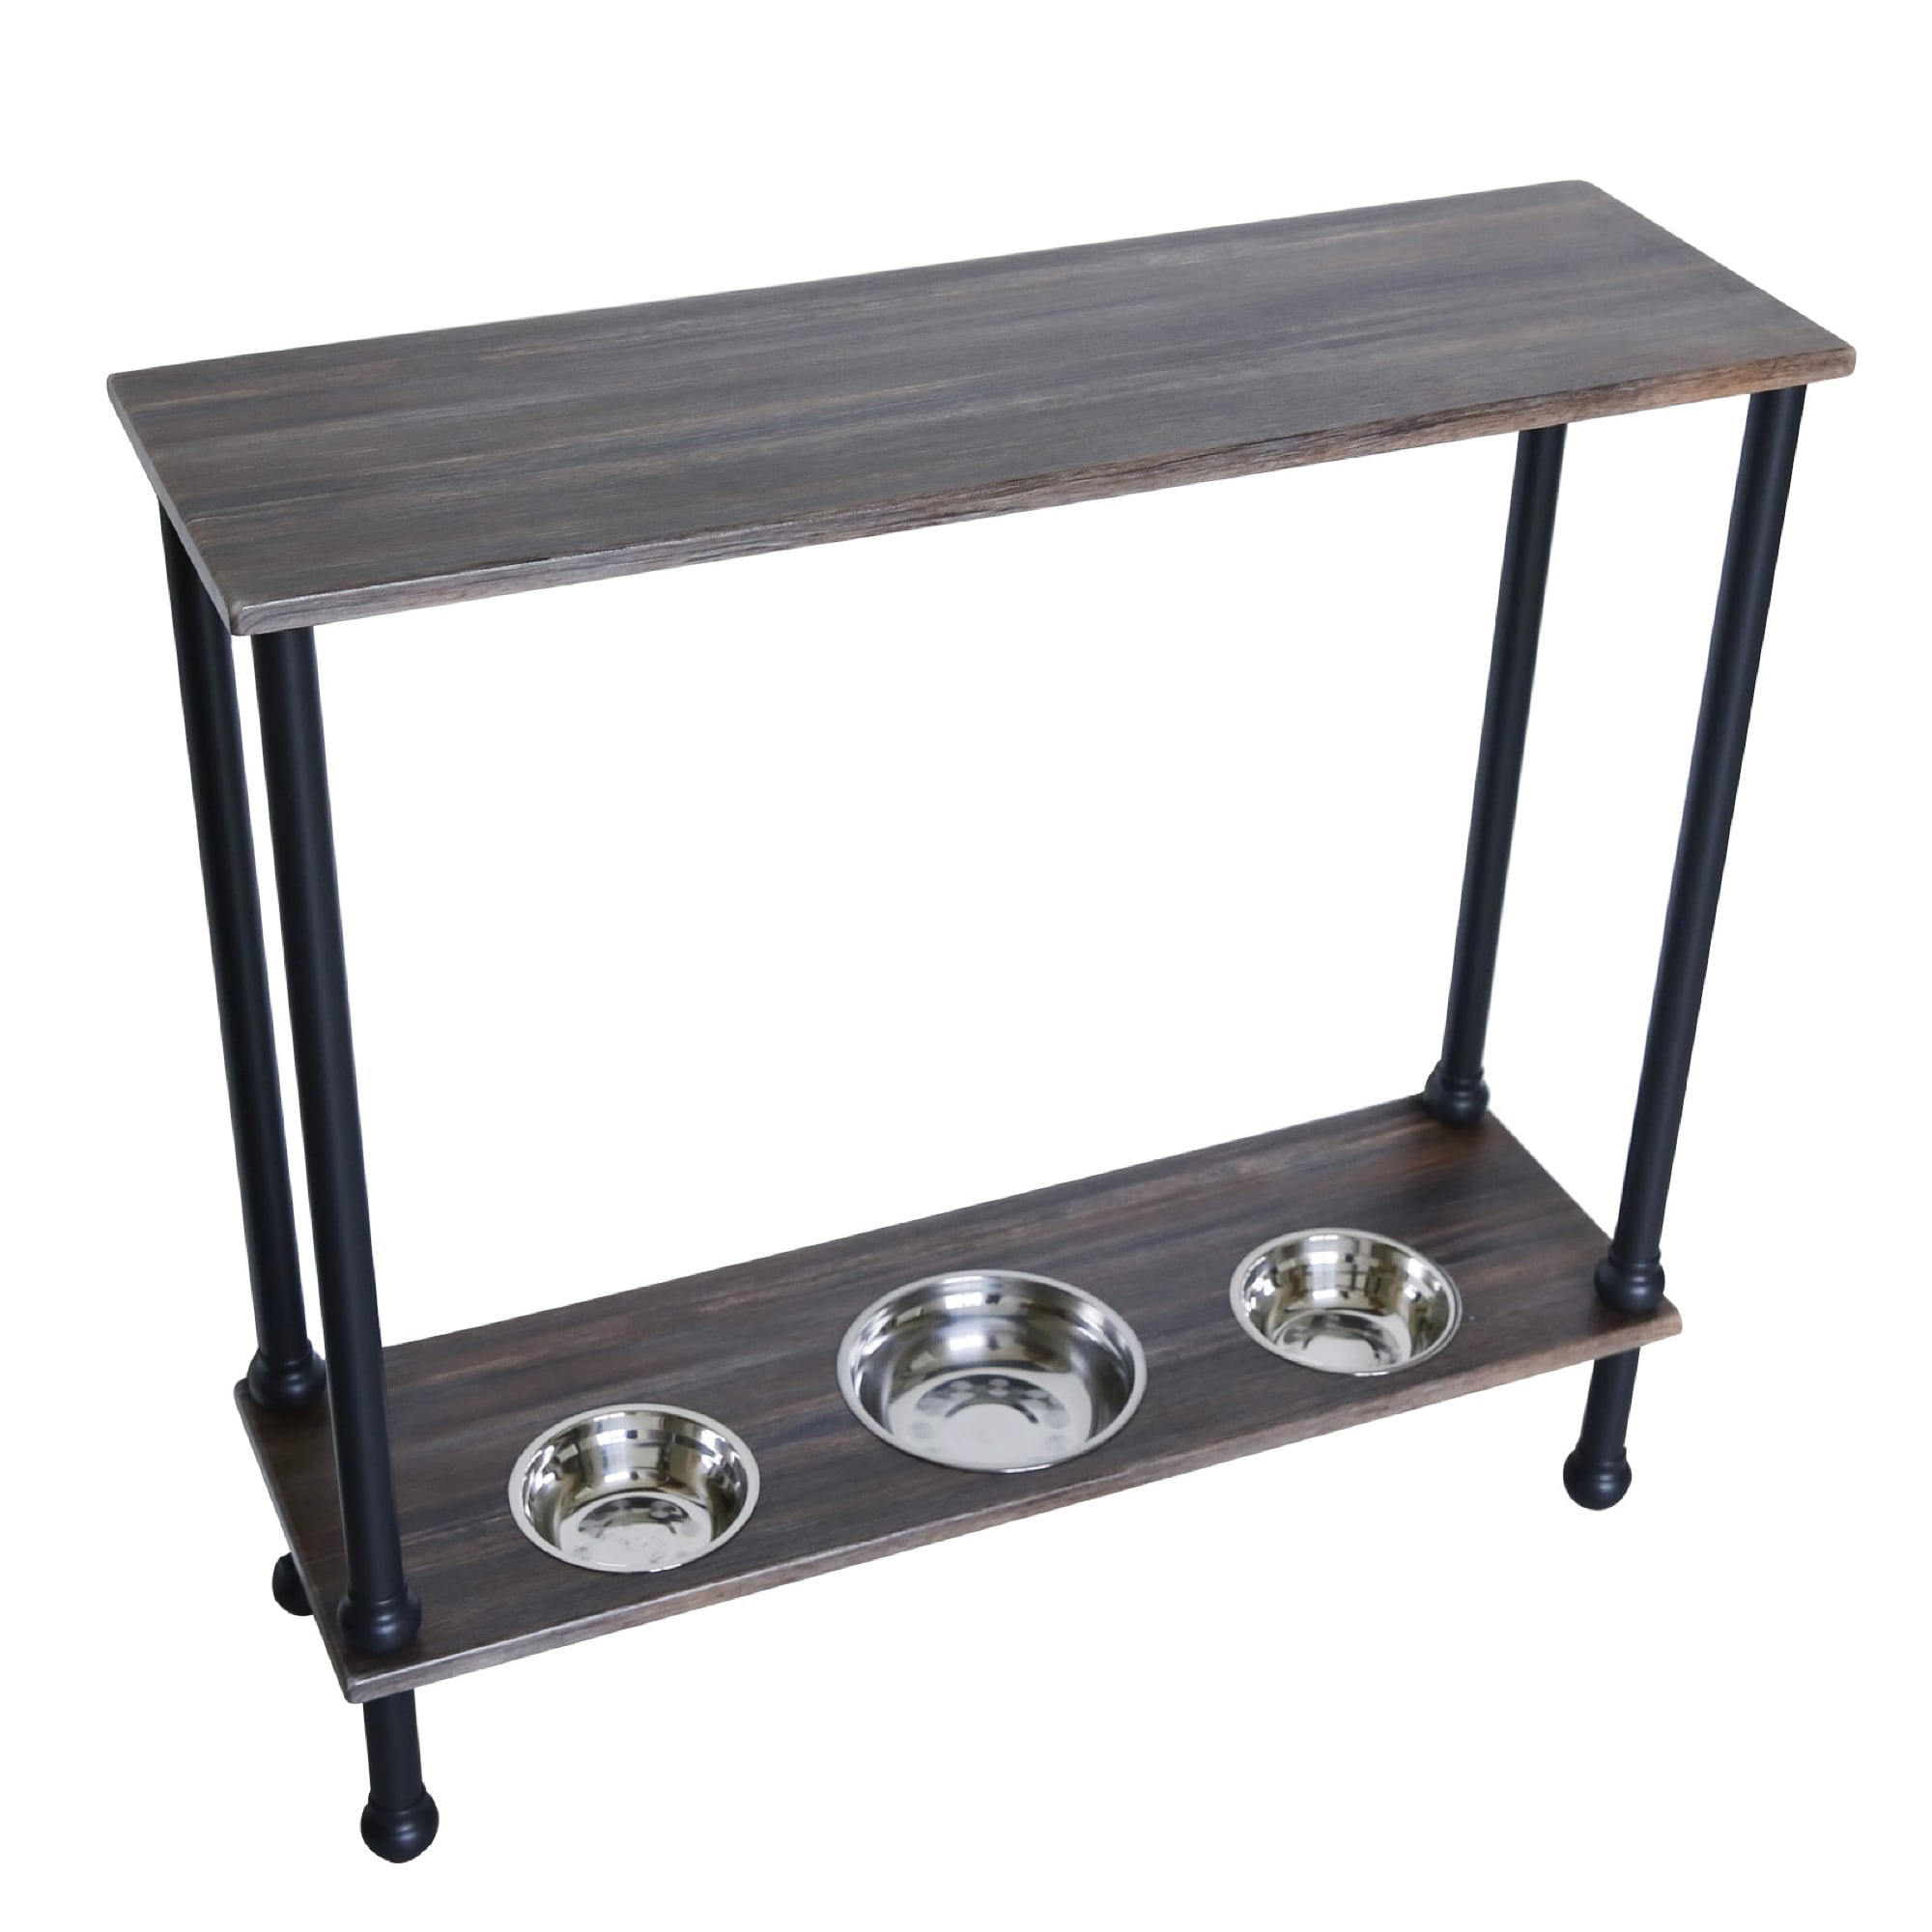 https://ak1.ostkcdn.com/images/products/is/images/direct/92970edb6d74867d7db74cba7b433771352d05d0/Roomfitters-Console-Entryway-Table-with-3-Pet-Feeder-Bowls.jpg